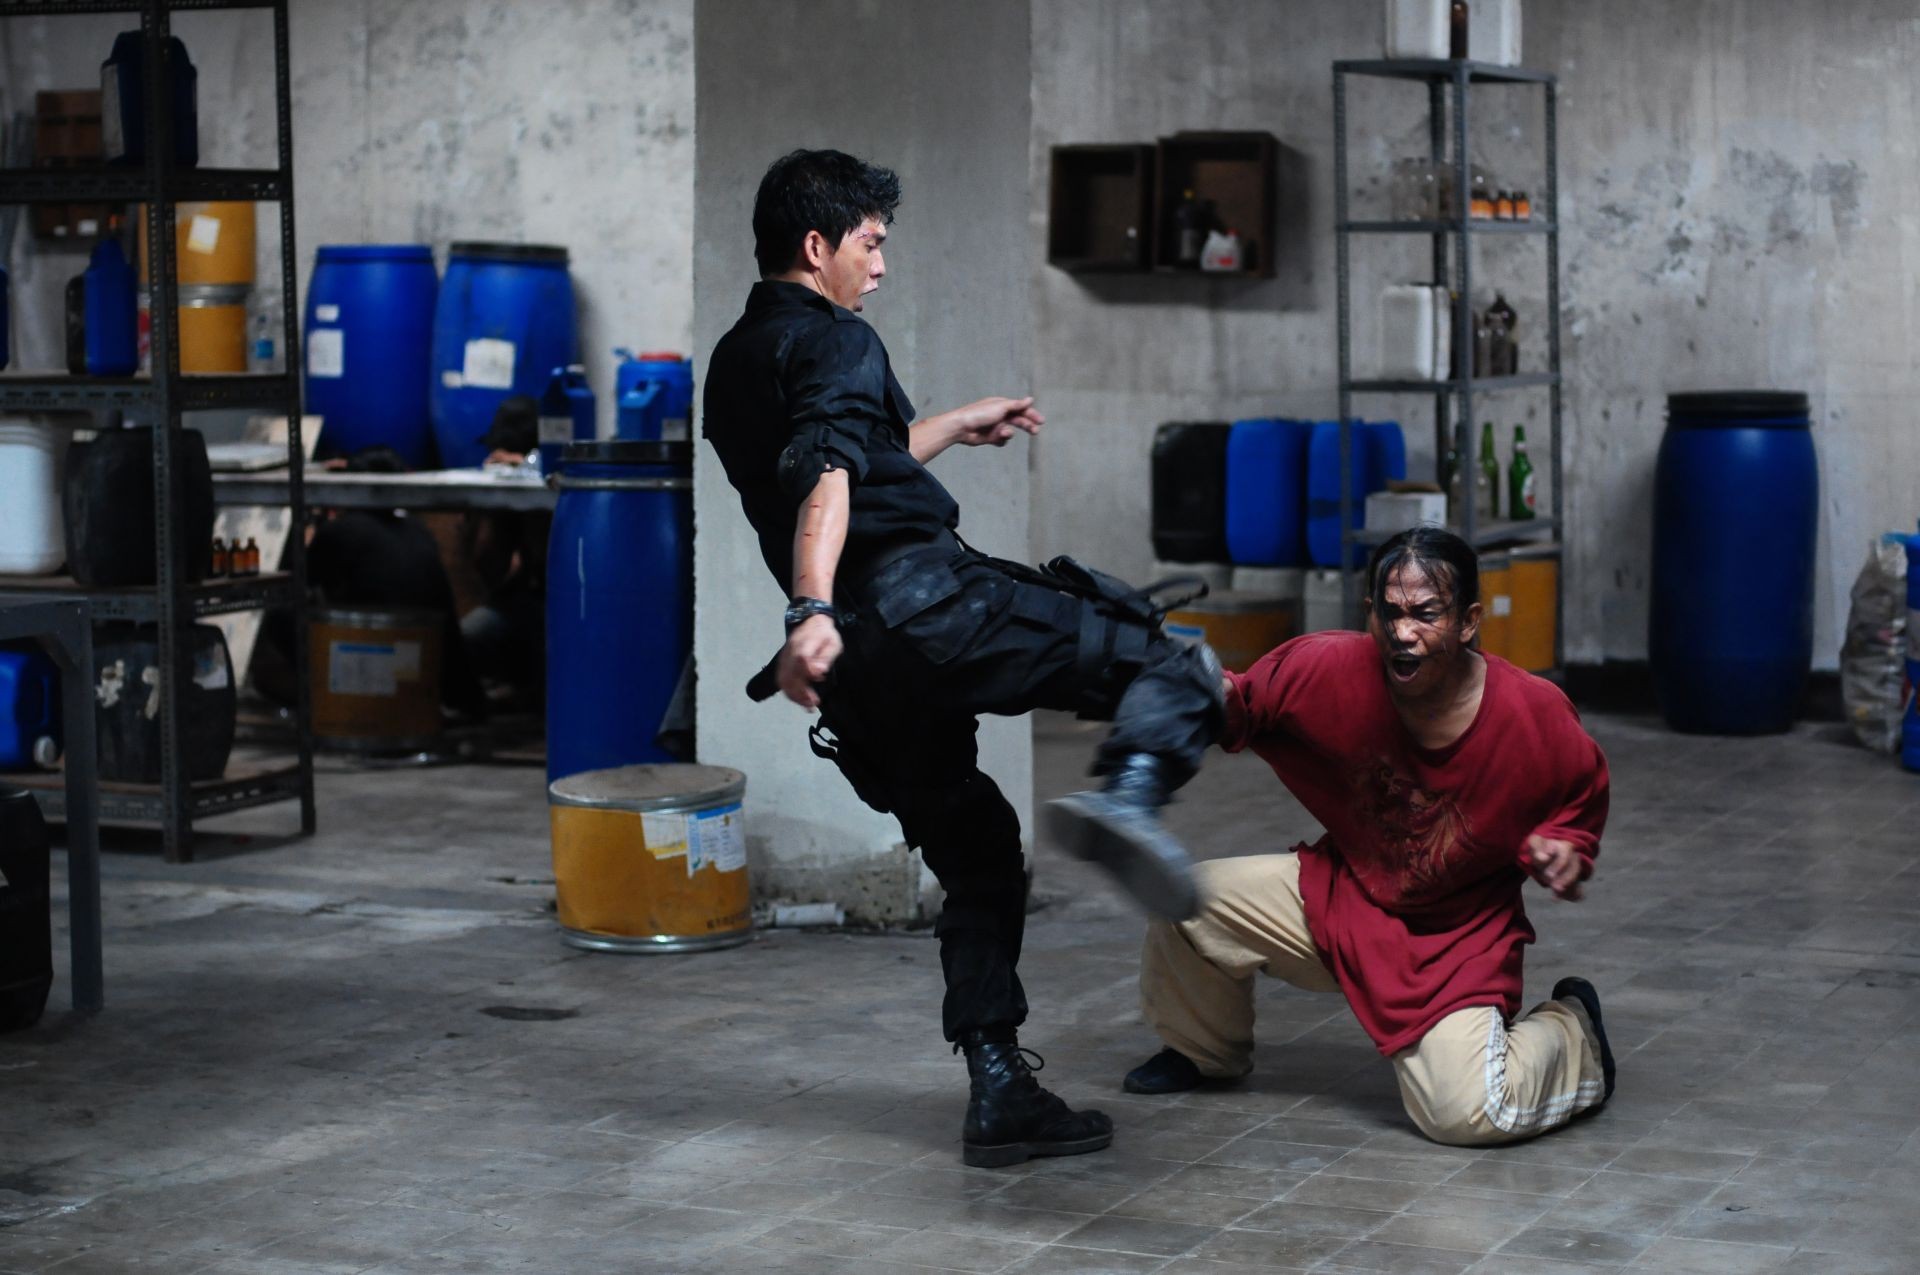 Iko Uwais stars as Rama in Sony Pictures Classics' The Raid: Redemption (2012)